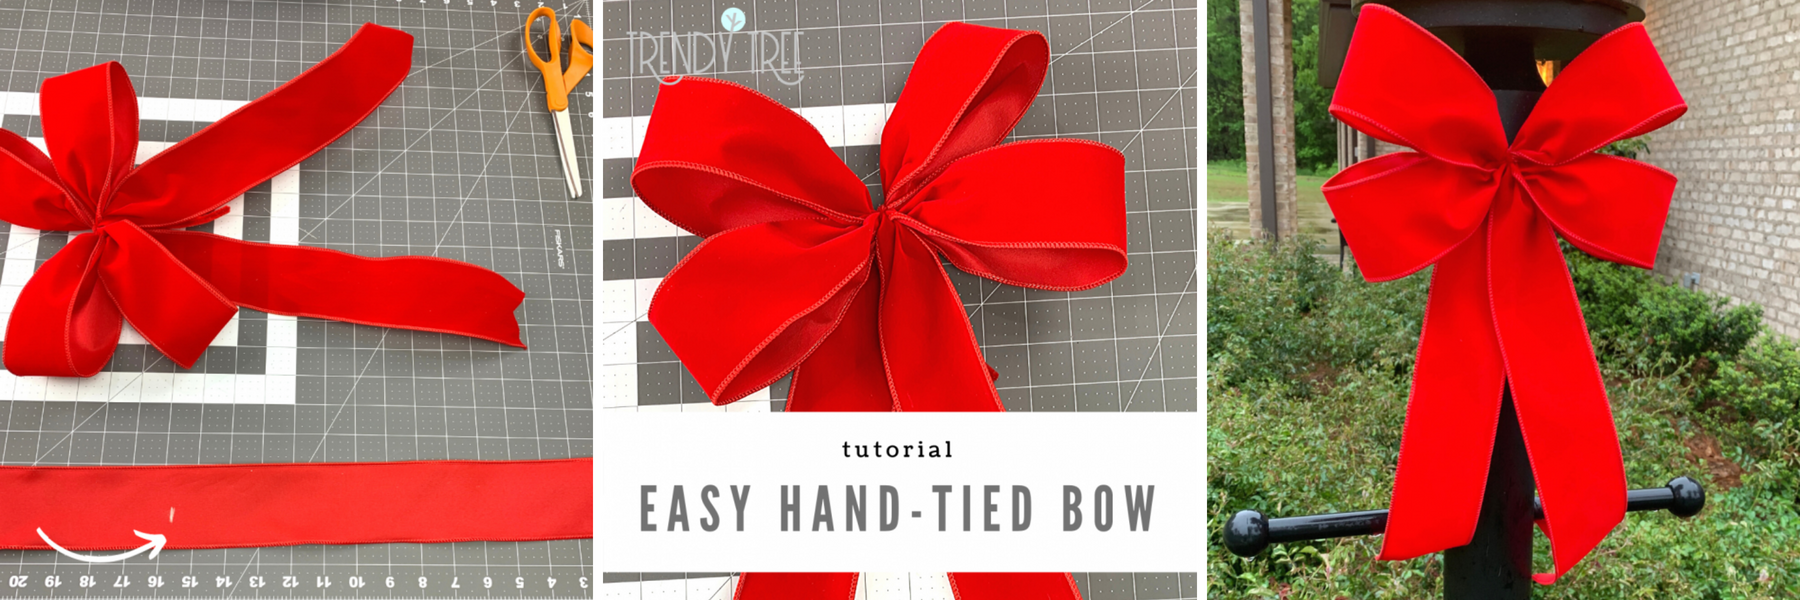 Easy Hand-Tied Bow Tutorial